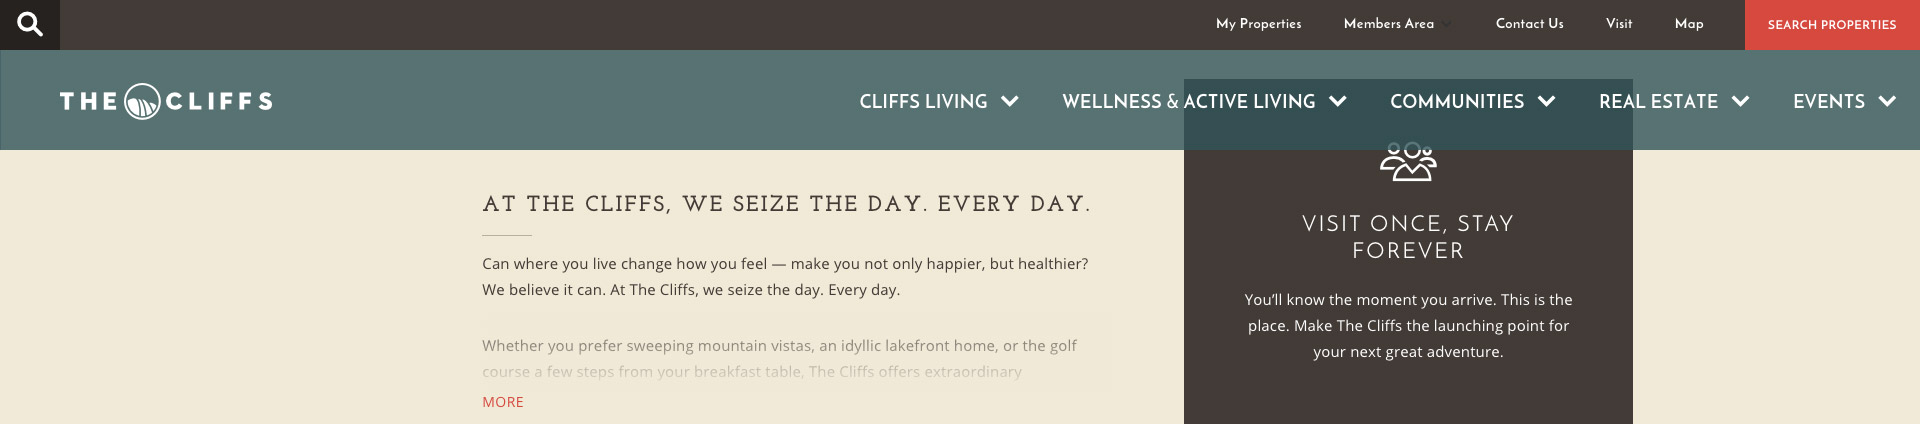 Example of a sticky menu in www.cliffsliving.com